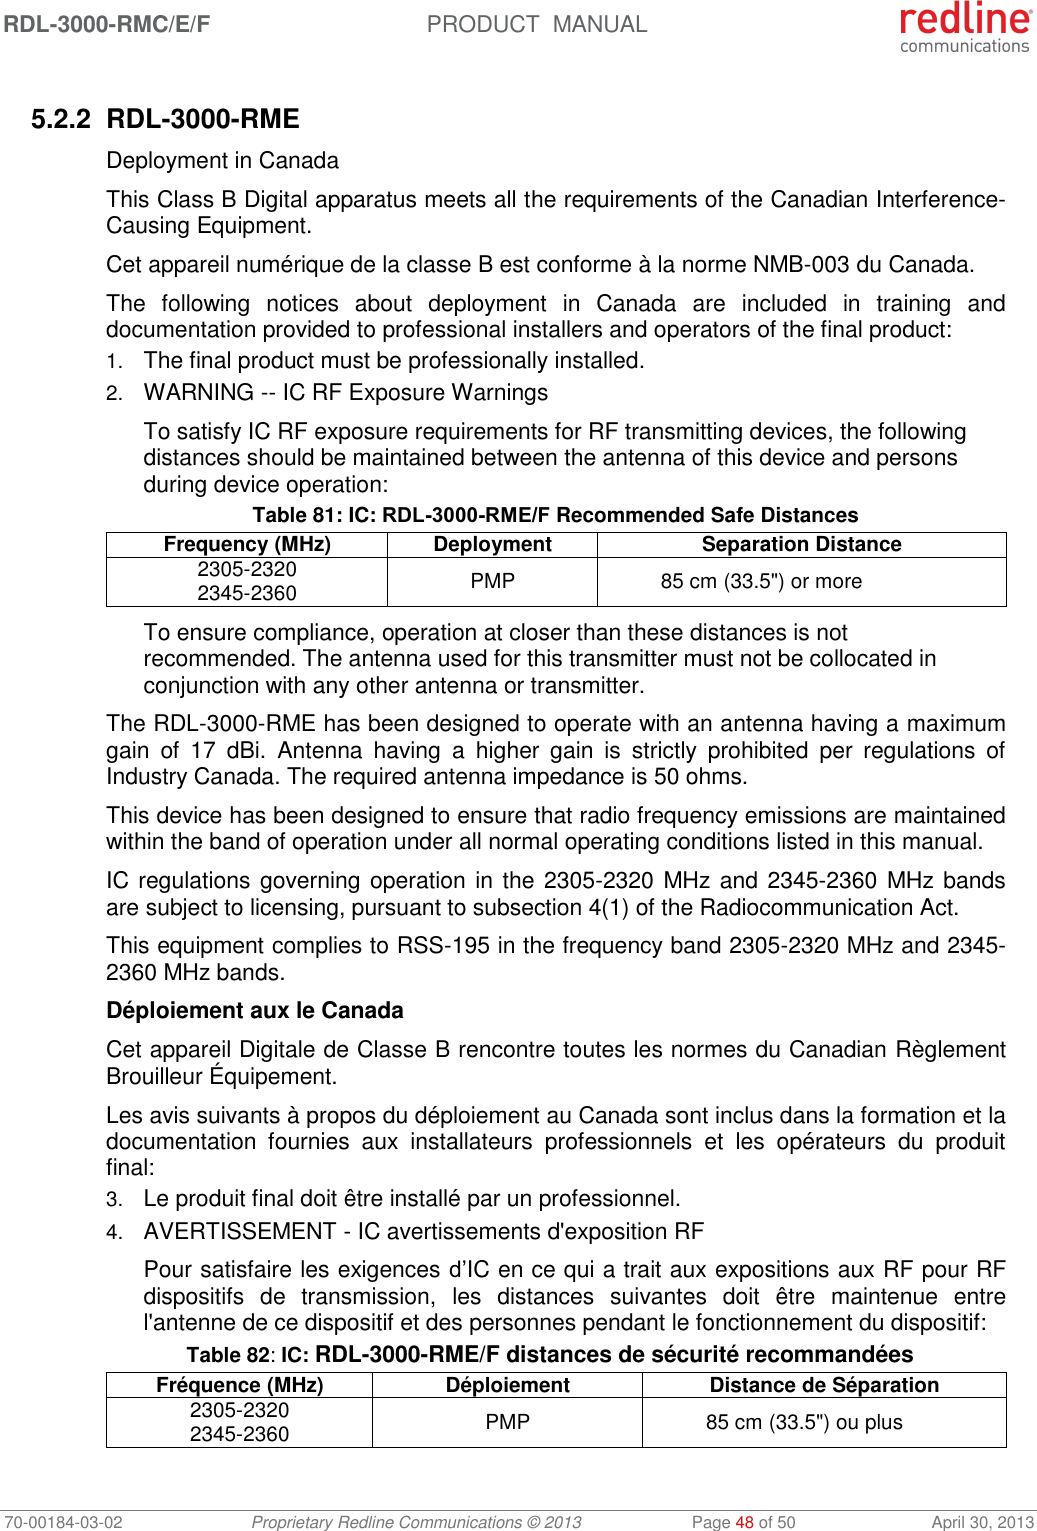 RDL-3000-RMC/E/F  PRODUCT  MANUAL 70-00184-03-02 Proprietary Redline Communications © 2013  Page 48 of 50  April 30, 2013  5.2.2 RDL-3000-RME Deployment in Canada This Class B Digital apparatus meets all the requirements of the Canadian Interference-Causing Equipment. Cet appareil numérique de la classe B est conforme à la norme NMB-003 du Canada. The  following  notices  about  deployment  in  Canada  are  included  in  training  and documentation provided to professional installers and operators of the final product: 1. The final product must be professionally installed. 2. WARNING -- IC RF Exposure Warnings To satisfy IC RF exposure requirements for RF transmitting devices, the following distances should be maintained between the antenna of this device and persons during device operation: Table 81: IC: RDL-3000-RME/F Recommended Safe Distances Frequency (MHz) Deployment Separation Distance 2305-2320 2345-2360 PMP 85 cm (33.5&quot;) or more To ensure compliance, operation at closer than these distances is not recommended. The antenna used for this transmitter must not be collocated in conjunction with any other antenna or transmitter. The RDL-3000-RME has been designed to operate with an antenna having a maximum gain  of  17  dBi.  Antenna  having  a  higher  gain  is  strictly  prohibited  per  regulations  of Industry Canada. The required antenna impedance is 50 ohms. This device has been designed to ensure that radio frequency emissions are maintained within the band of operation under all normal operating conditions listed in this manual. IC regulations governing operation in the 2305-2320 MHz and 2345-2360 MHz bands are subject to licensing, pursuant to subsection 4(1) of the Radiocommunication Act. This equipment complies to RSS-195 in the frequency band 2305-2320 MHz and 2345-2360 MHz bands. Déploiement aux le Canada Cet appareil Digitale de Classe B rencontre toutes les normes du Canadian Règlement  Brouilleur Équipement. Les avis suivants à propos du déploiement au Canada sont inclus dans la formation et la documentation  fournies  aux  installateurs  professionnels  et  les  opérateurs  du  produit final: 3. Le produit final doit être installé par un professionnel. 4. AVERTISSEMENT - IC avertissements d&apos;exposition RF Pour satisfaire les exigences d’IC en ce qui a trait aux expositions aux RF pour RF dispositifs  de  transmission,  les  distances  suivantes  doit  être  maintenue  entre l&apos;antenne de ce dispositif et des personnes pendant le fonctionnement du dispositif: Table 82: IC: RDL-3000-RME/F distances de sécurité recommandées Fréquence (MHz) Déploiement Distance de Séparation 2305-2320 2345-2360  PMP 85 cm (33.5&quot;) ou plus 